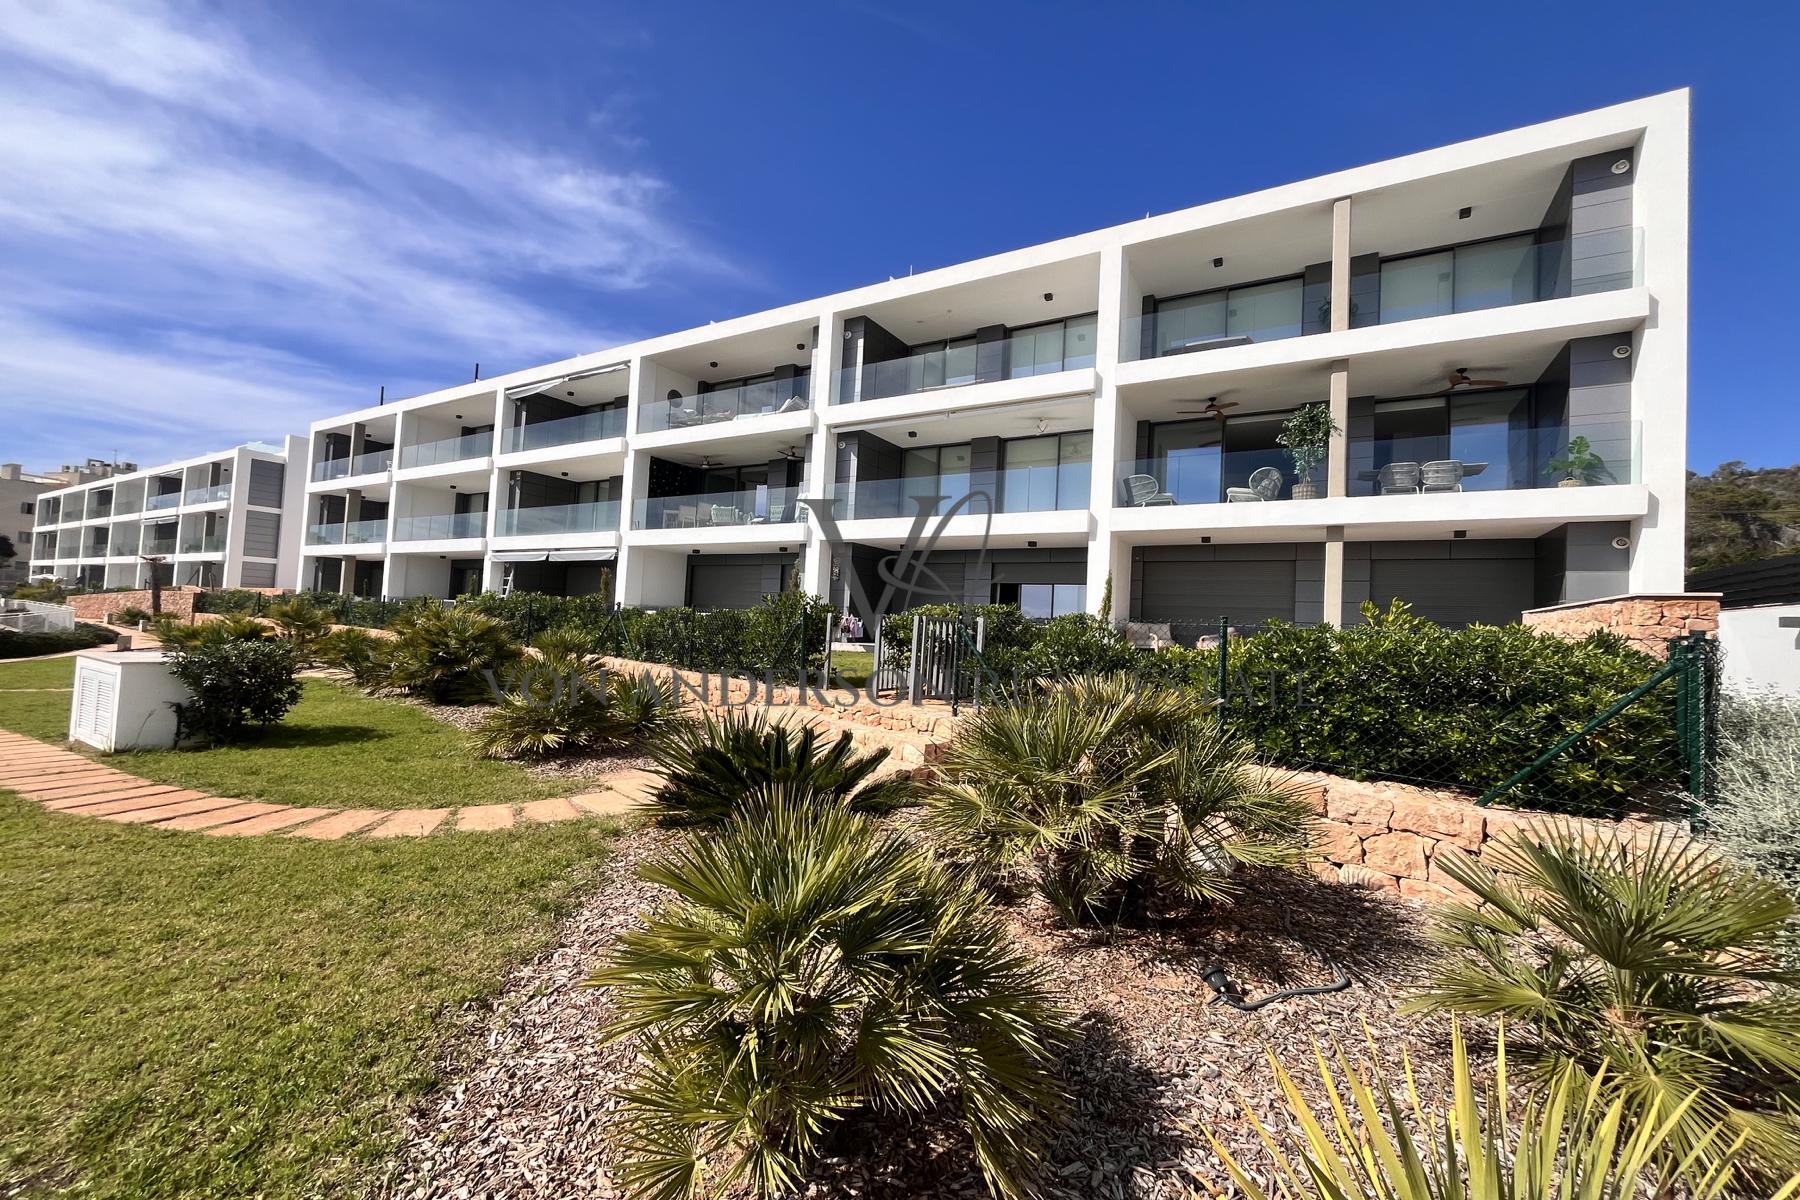 New Elegant Cosmopolitan Apartment with Stunning Sea & Sunset Views, ref. VA1059, for sale in Ibiza by Von Anderson Real Estate